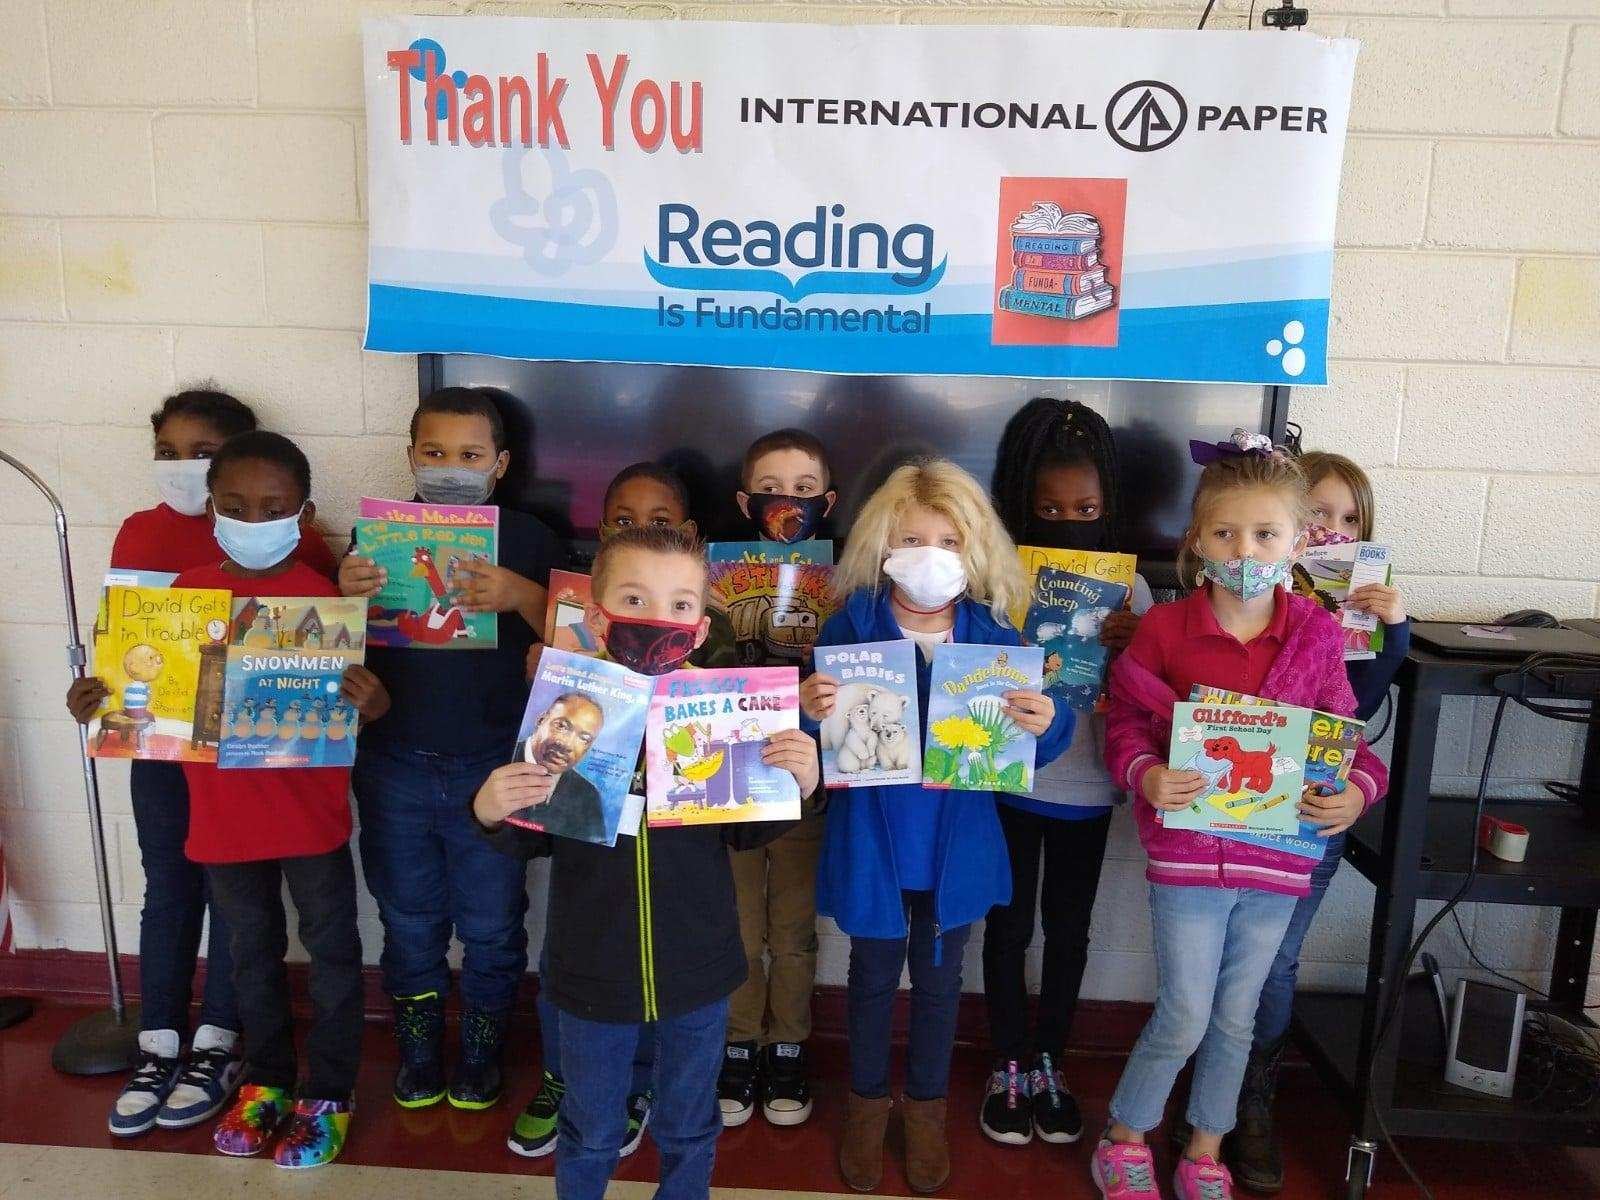 Students from Tabor City Elementary School stand in a group, each holding books and smiling. They have received these books as part of RIF's Rally to Read 100 intiative.